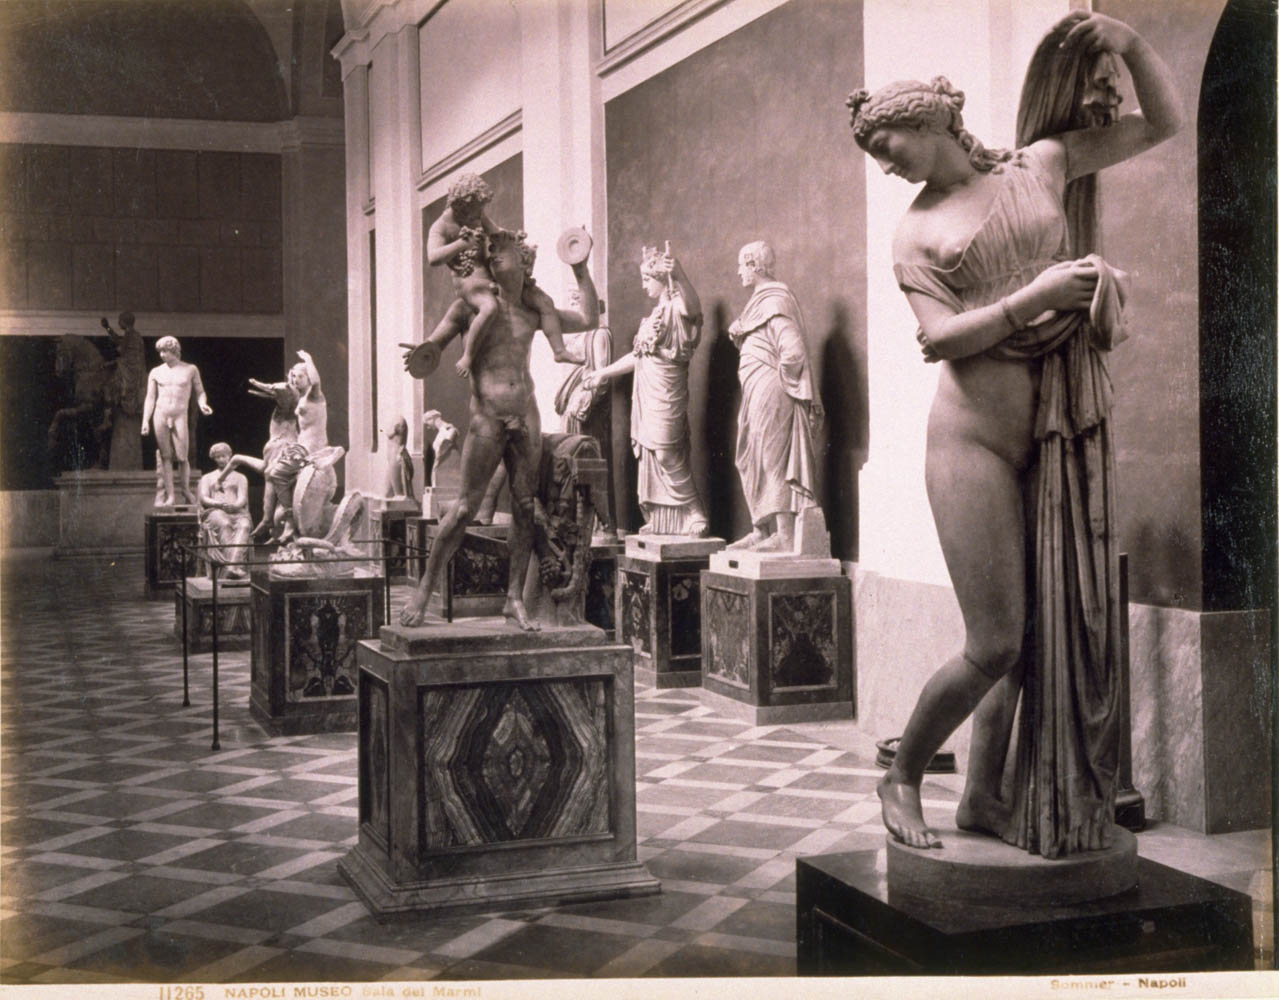 'Napoli Museo, Sala dei Marmi [Naples Museum, Salon of Marble]' by G. Sommer, 1880 (St Andrews ms-29951-10.35) 